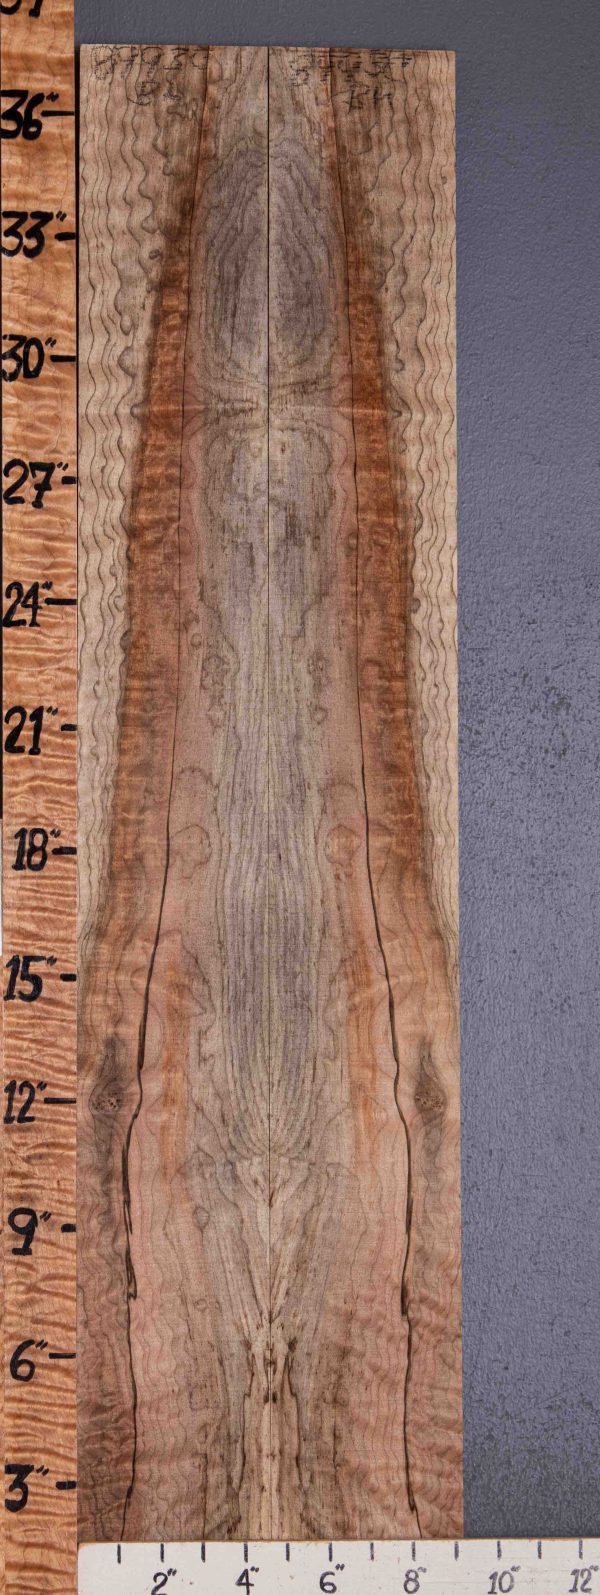 5A Spalted Maple Bookmatch Microlumber 9"1/4 X 37" X 1/4 (NWT-8993C)